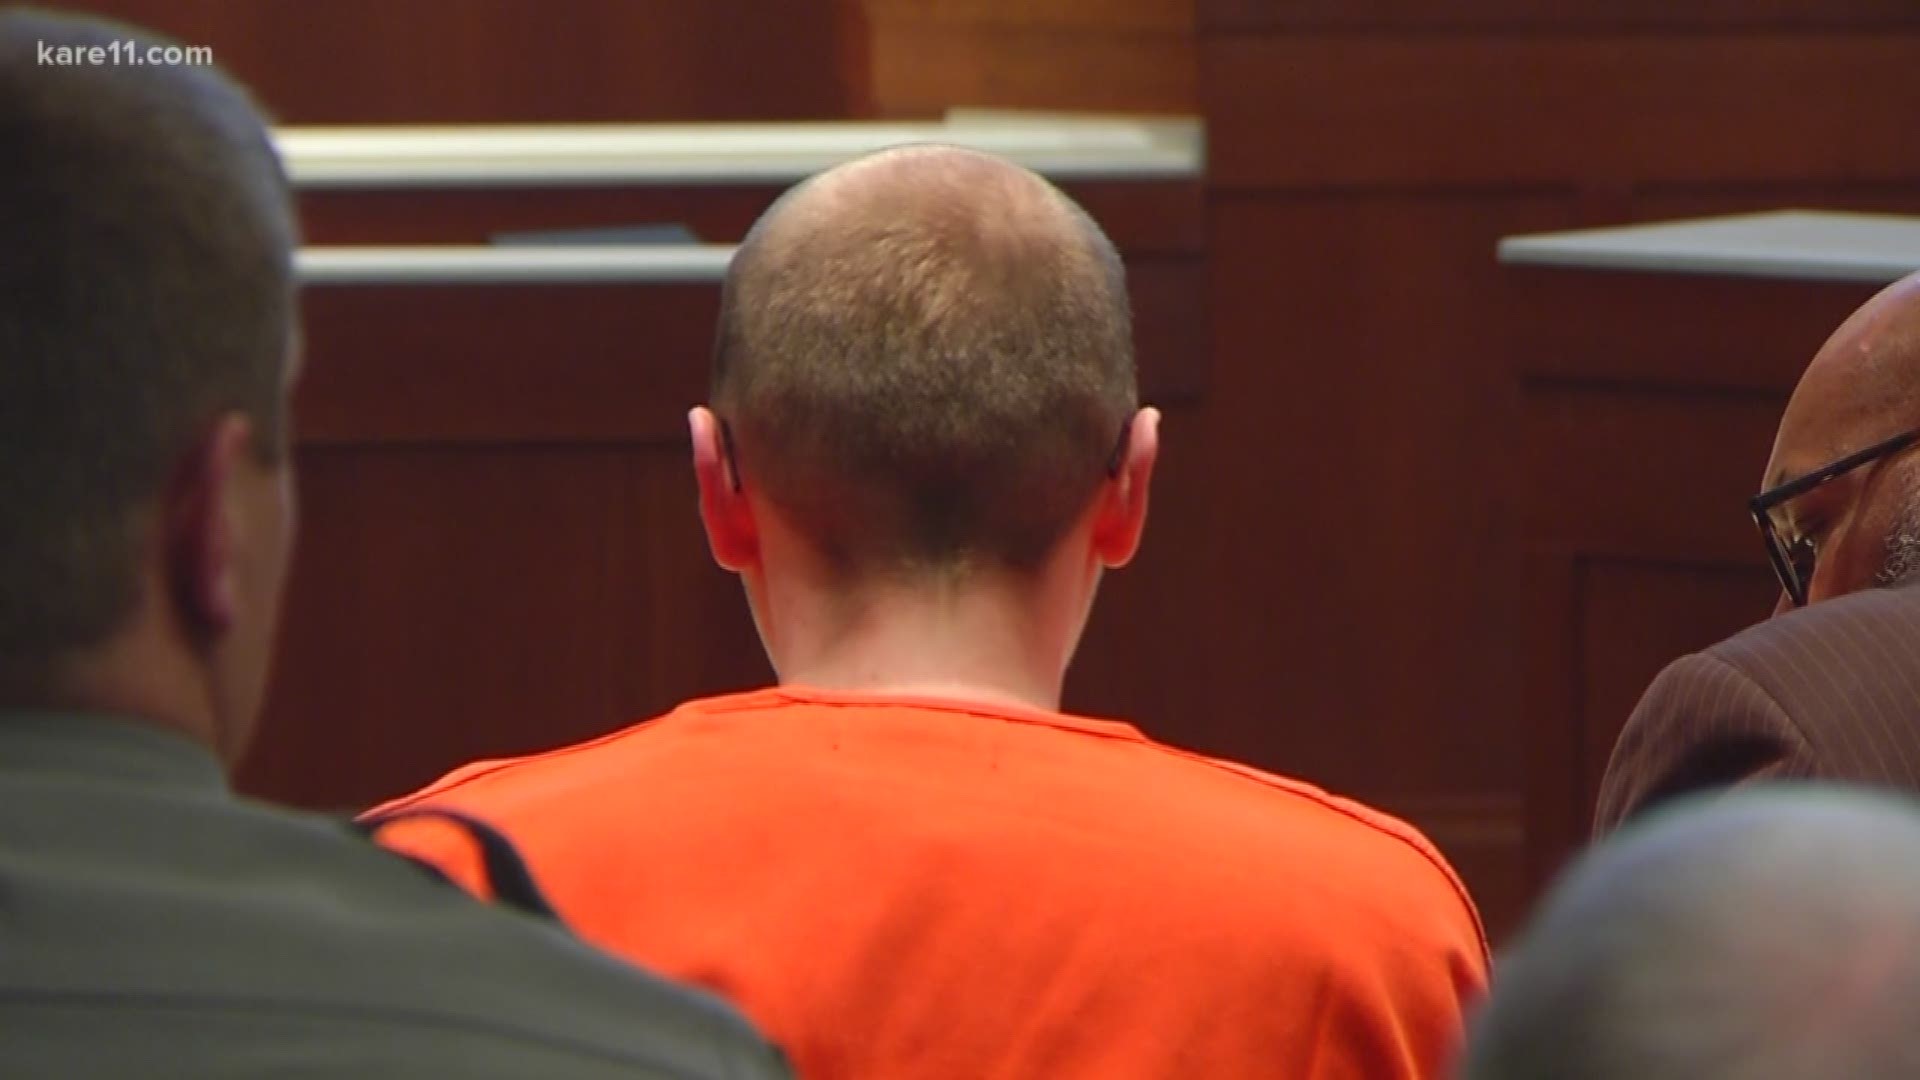 "You are the embodiment of evil," the judge told Jake Patterson as he handed down life without parole in the kidnapping of Jayme Closs and the murder of her parents, James and Denise. https://kare11.tv/2JClbre